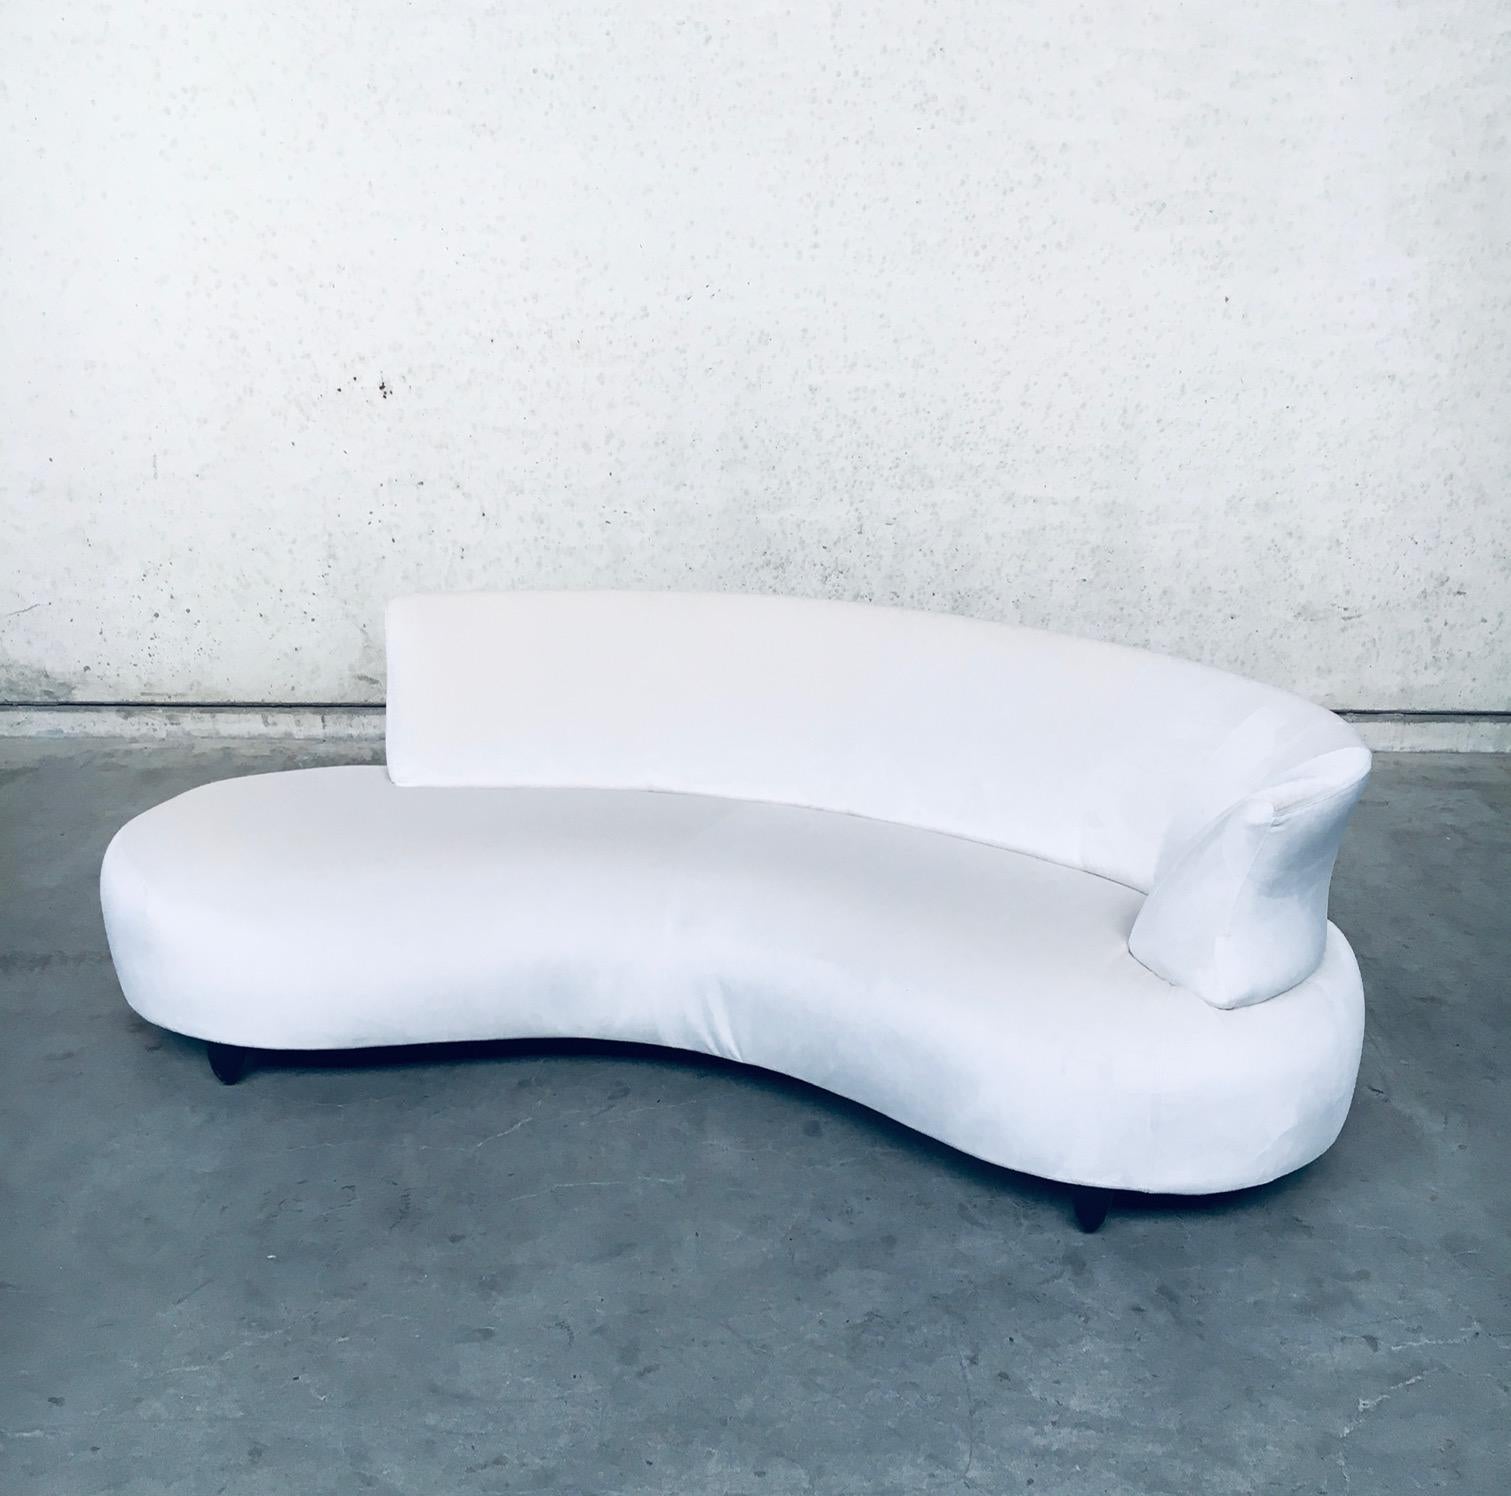 Vintage Postmodern Design Serpentine sofa, made in the 1970's. An outstanding vintage Serpentine sofa completely restored and updated with soft white velvet upholstery. This piece is in like new condition and very comfortable. An iconic mid century